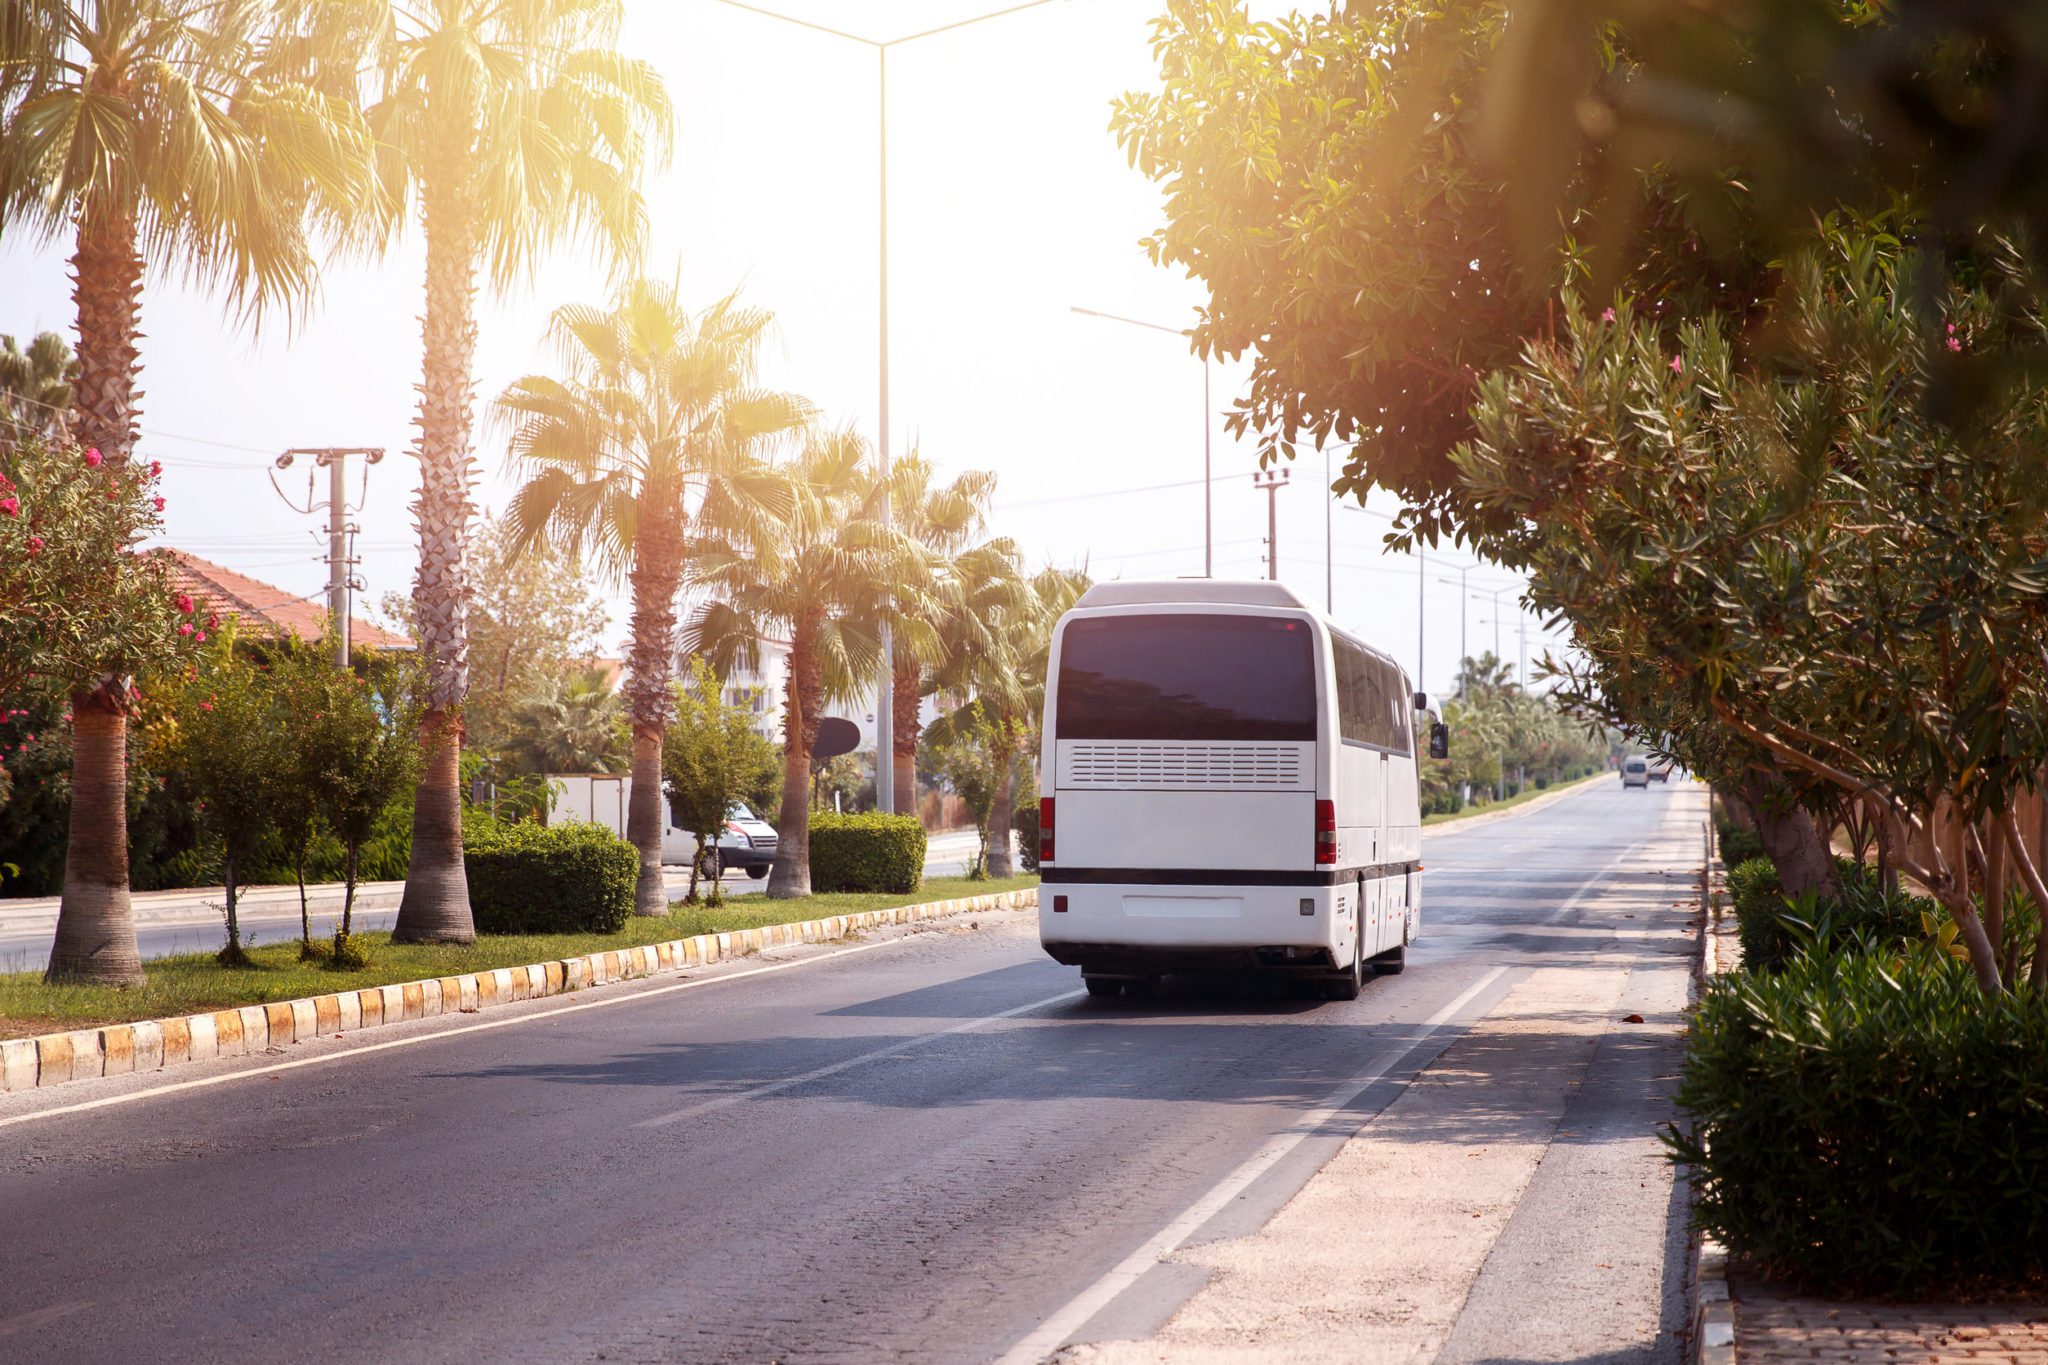 Tour Bus Injuries: Claiming Compensation for Injuries